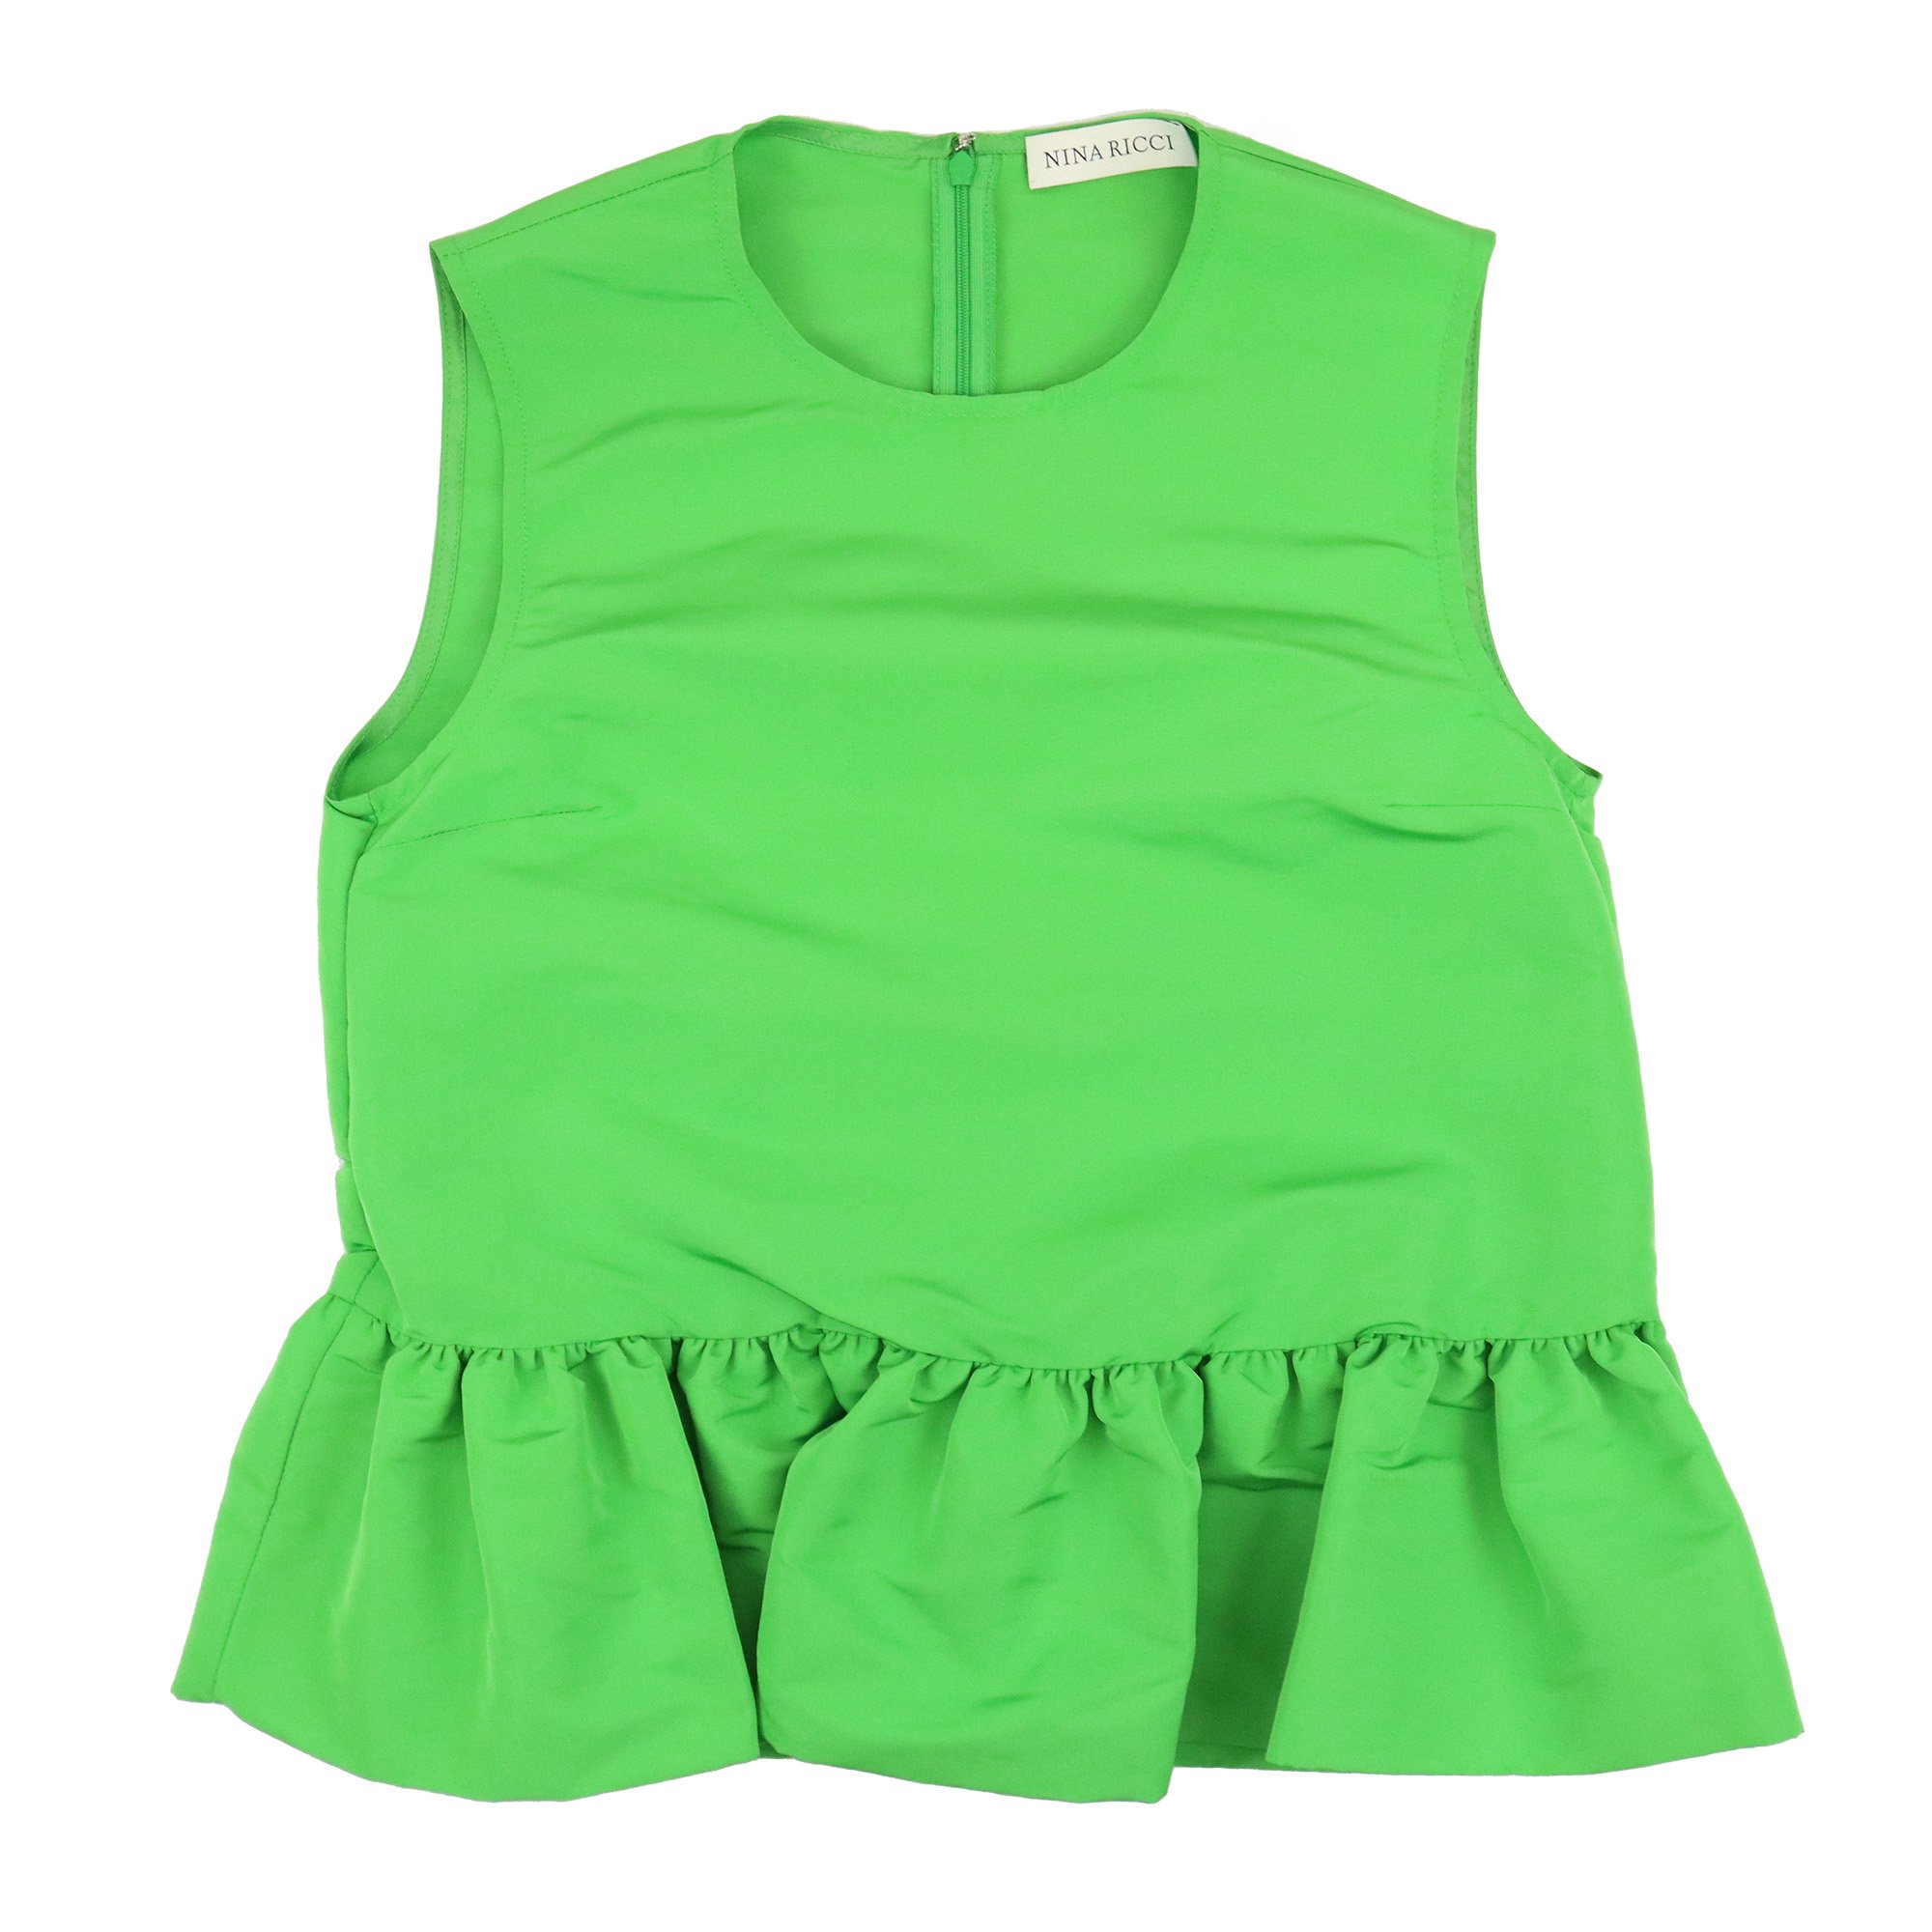 <img class='new_mark_img1' src='https://img.shop-pro.jp/img/new/icons7.gif' style='border:none;display:inline;margin:0px;padding:0px;width:auto;' />NINARICCI  POLYESTER BLOUSE【GREEN】